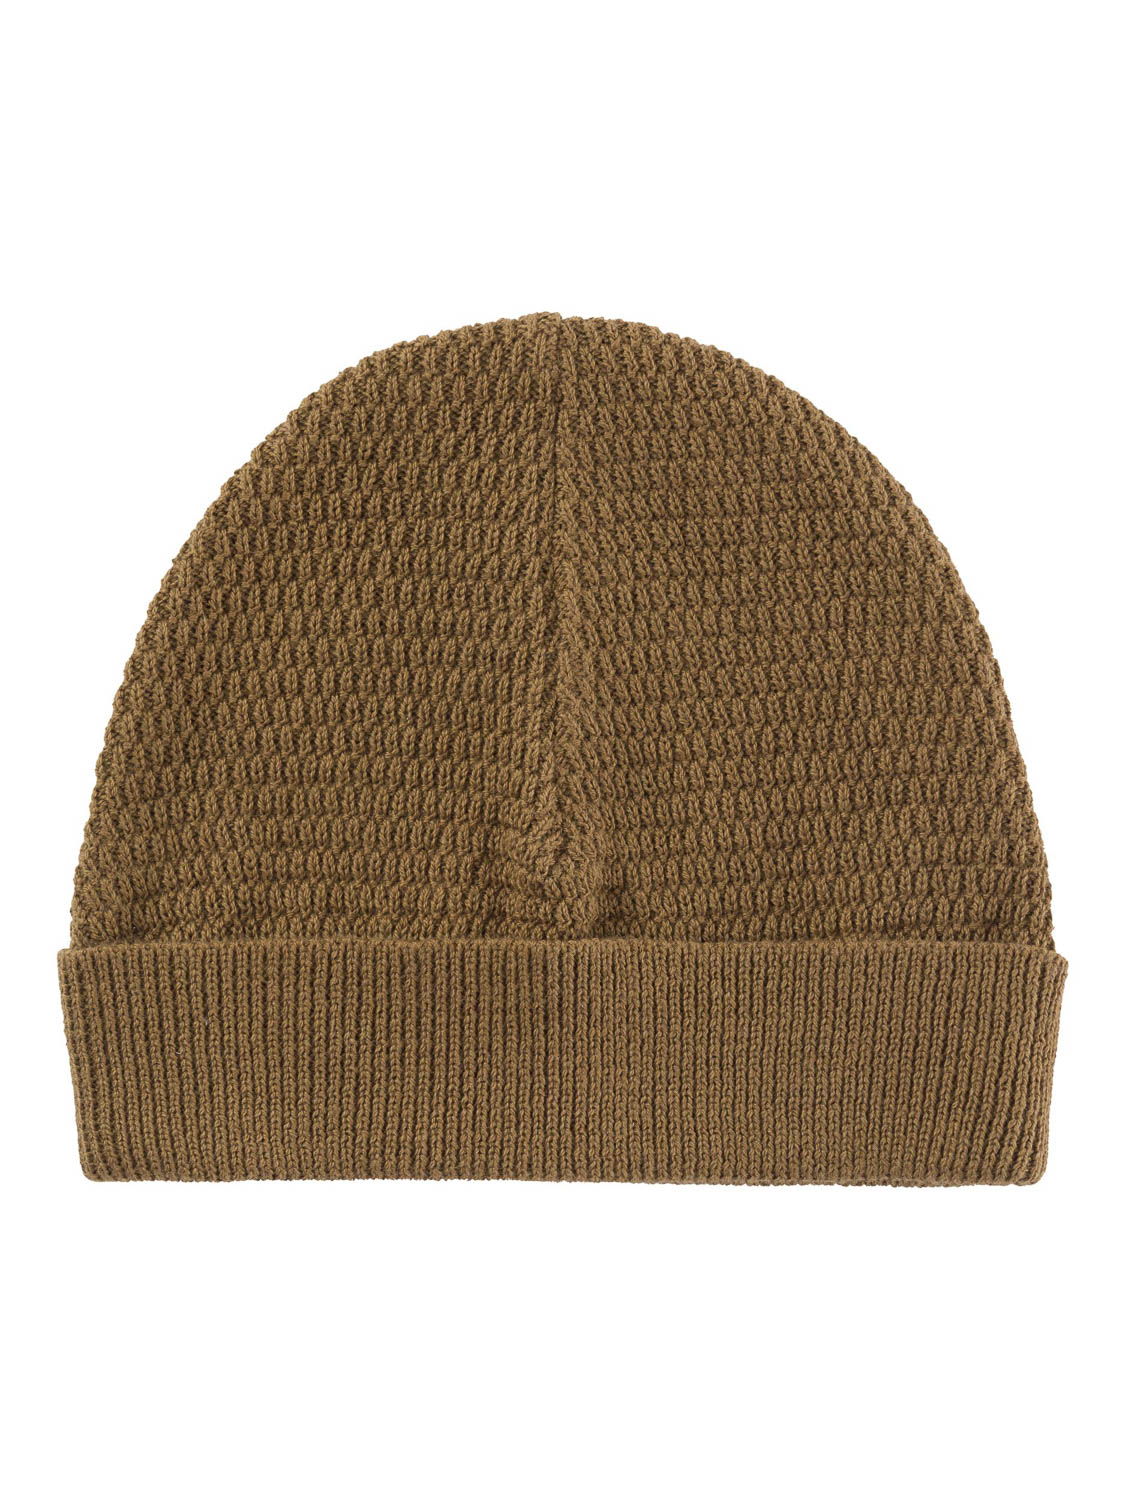 Name It Nbnotter Knit Hat